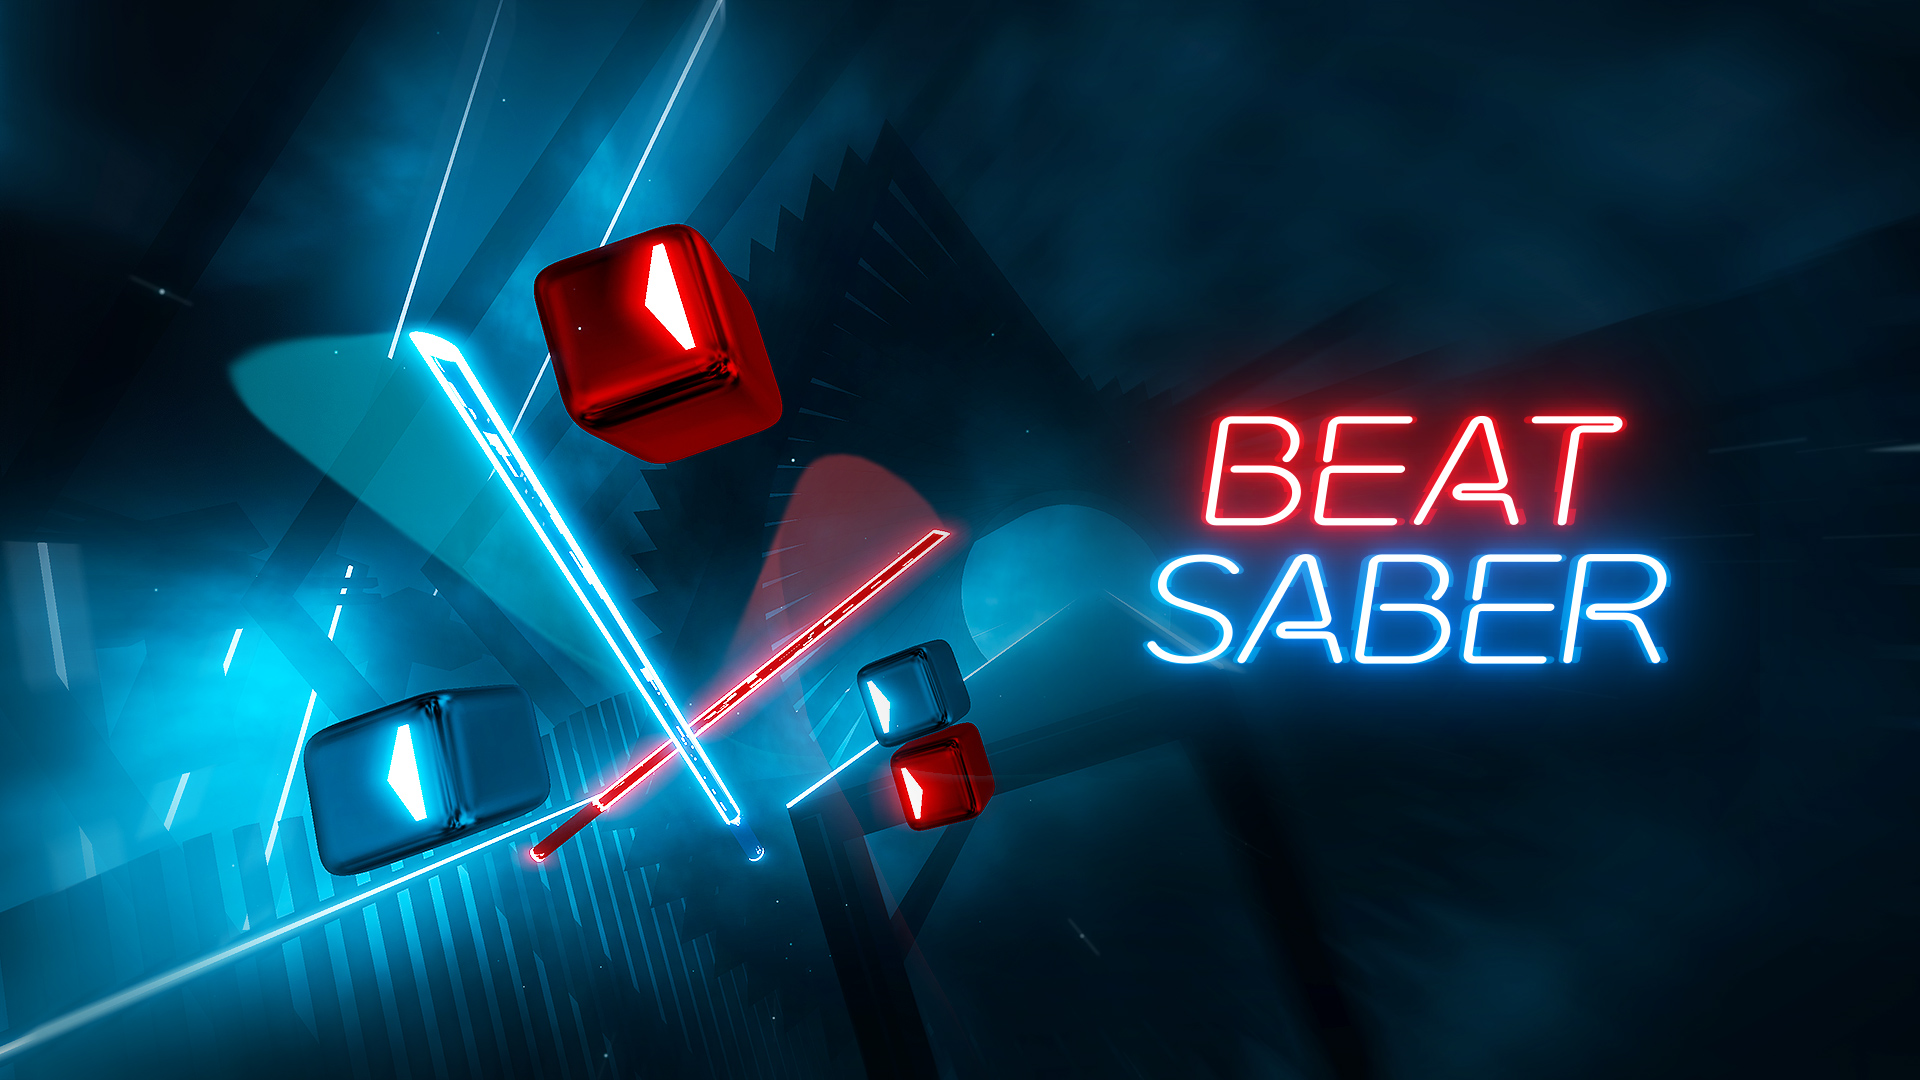 Hit VR game Beat Saber just 10 new tracks from No Time to Die singer | TechRadar